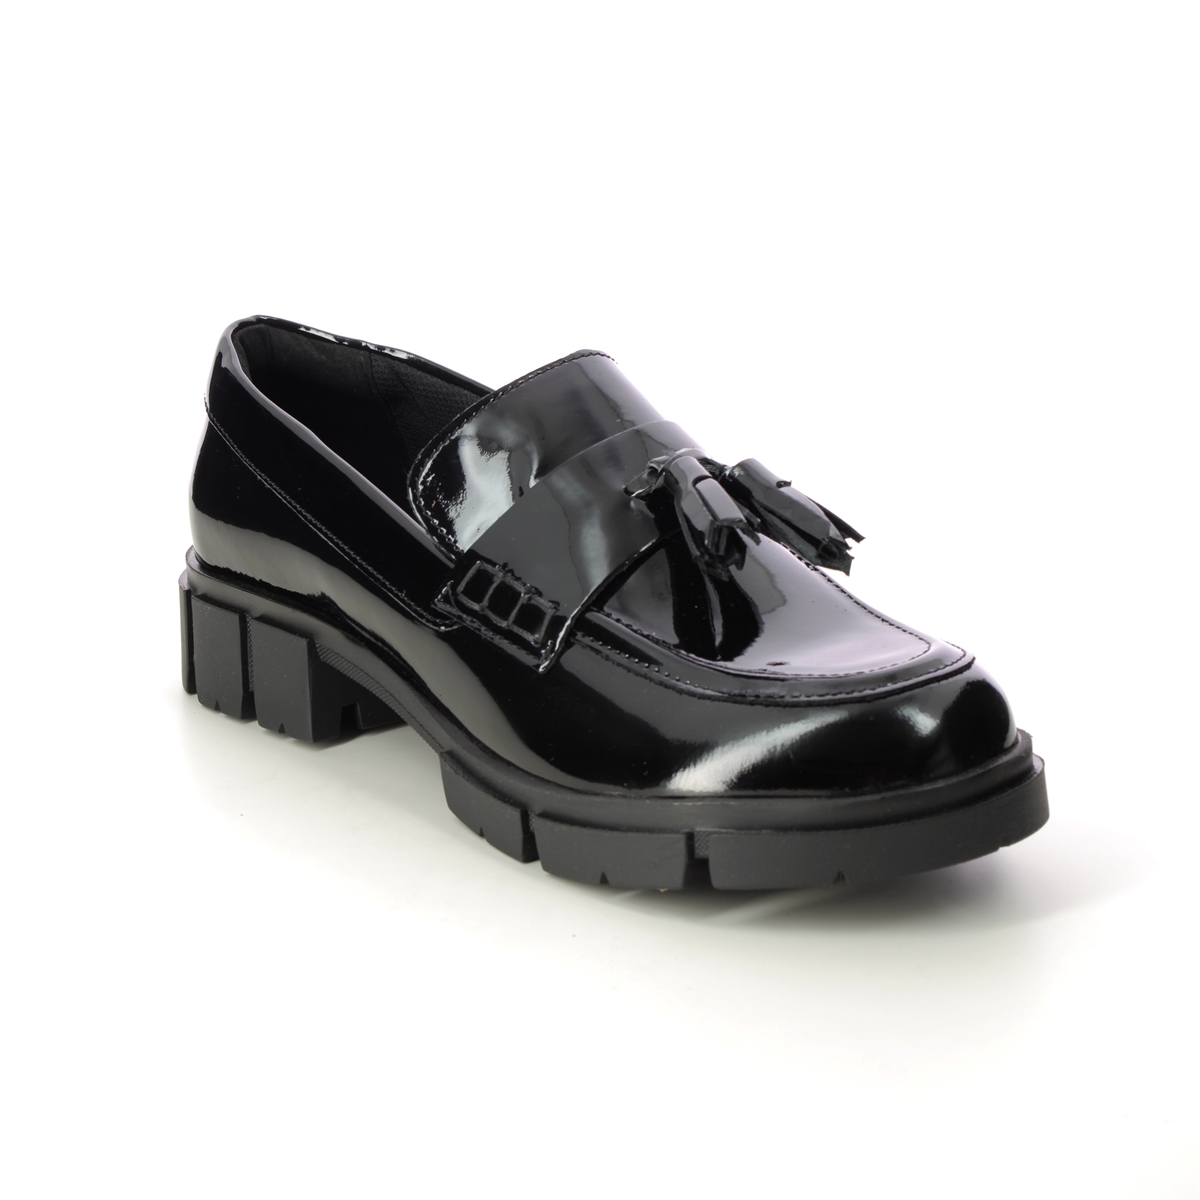 Clarks Teala Loafer Black Patent Womens Loafers 689984D In Size 5 In Plain Black Patent